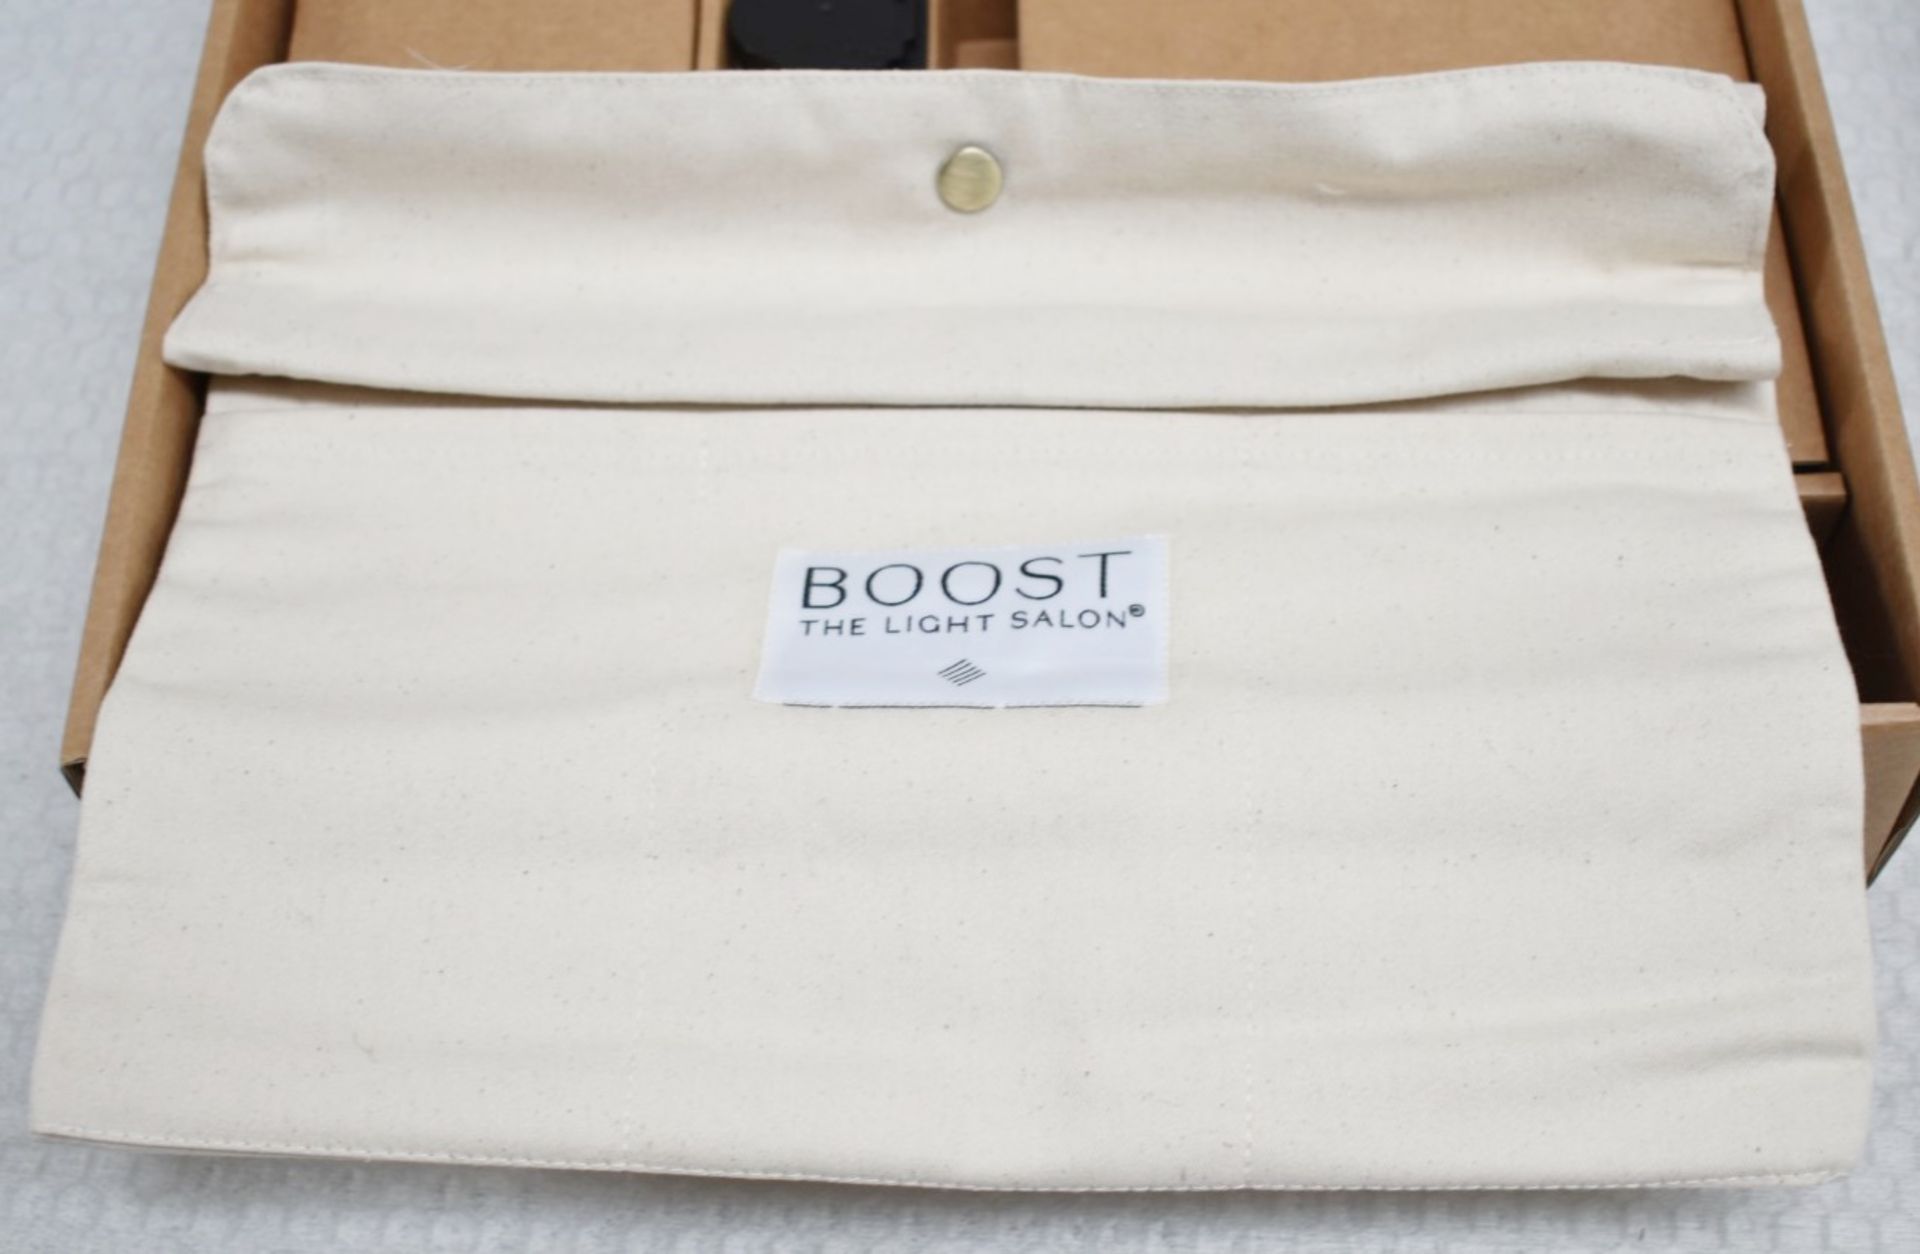 1 x THE LIGHT SALON 'Boost' Anti-inflammatory LED Body Patch - Original Price £375.00 - Unused Boxed - Image 4 of 9